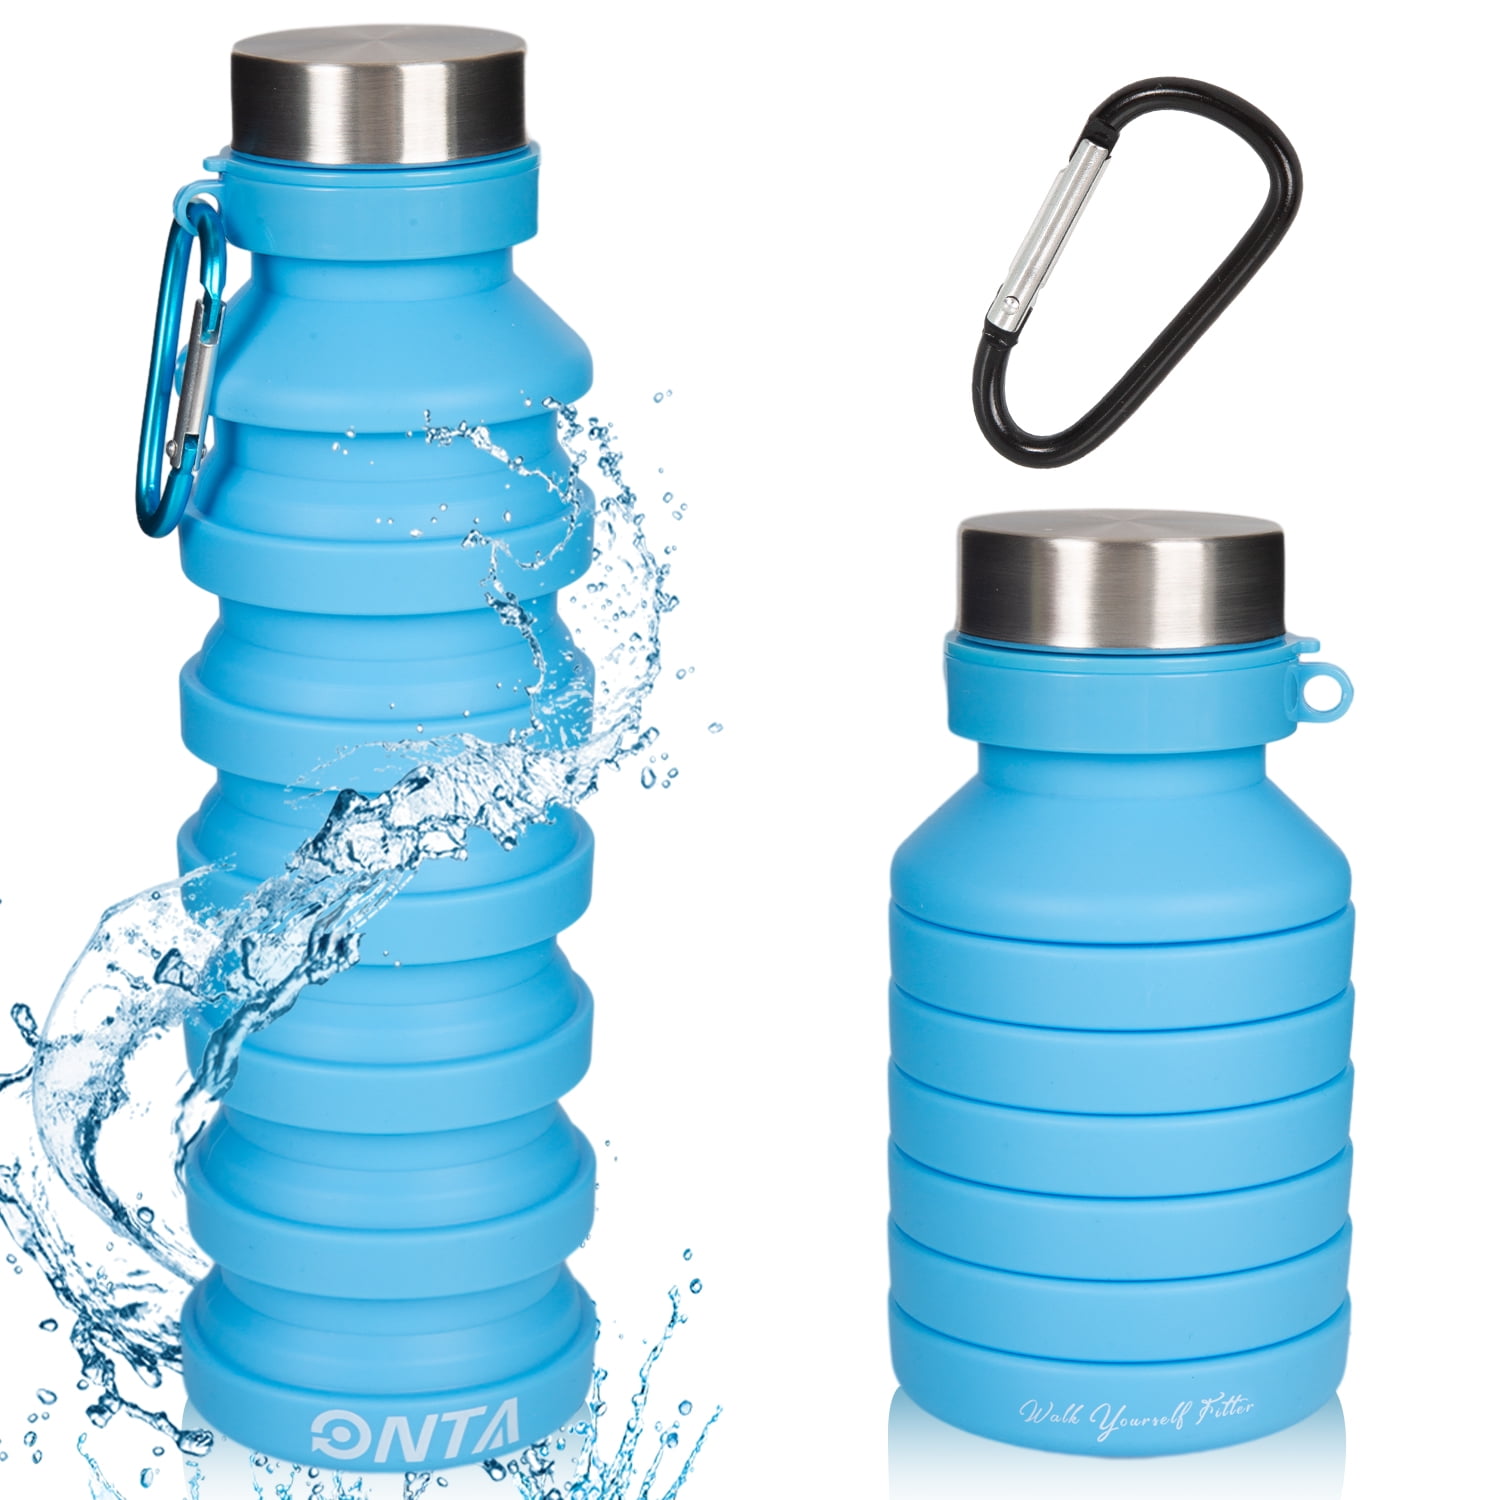 Collapsible Reusable Water Bottle with Carabiner Clip by Activiva - Light  Weight Leak Proof Foldable…See more Collapsible Reusable Water Bottle with